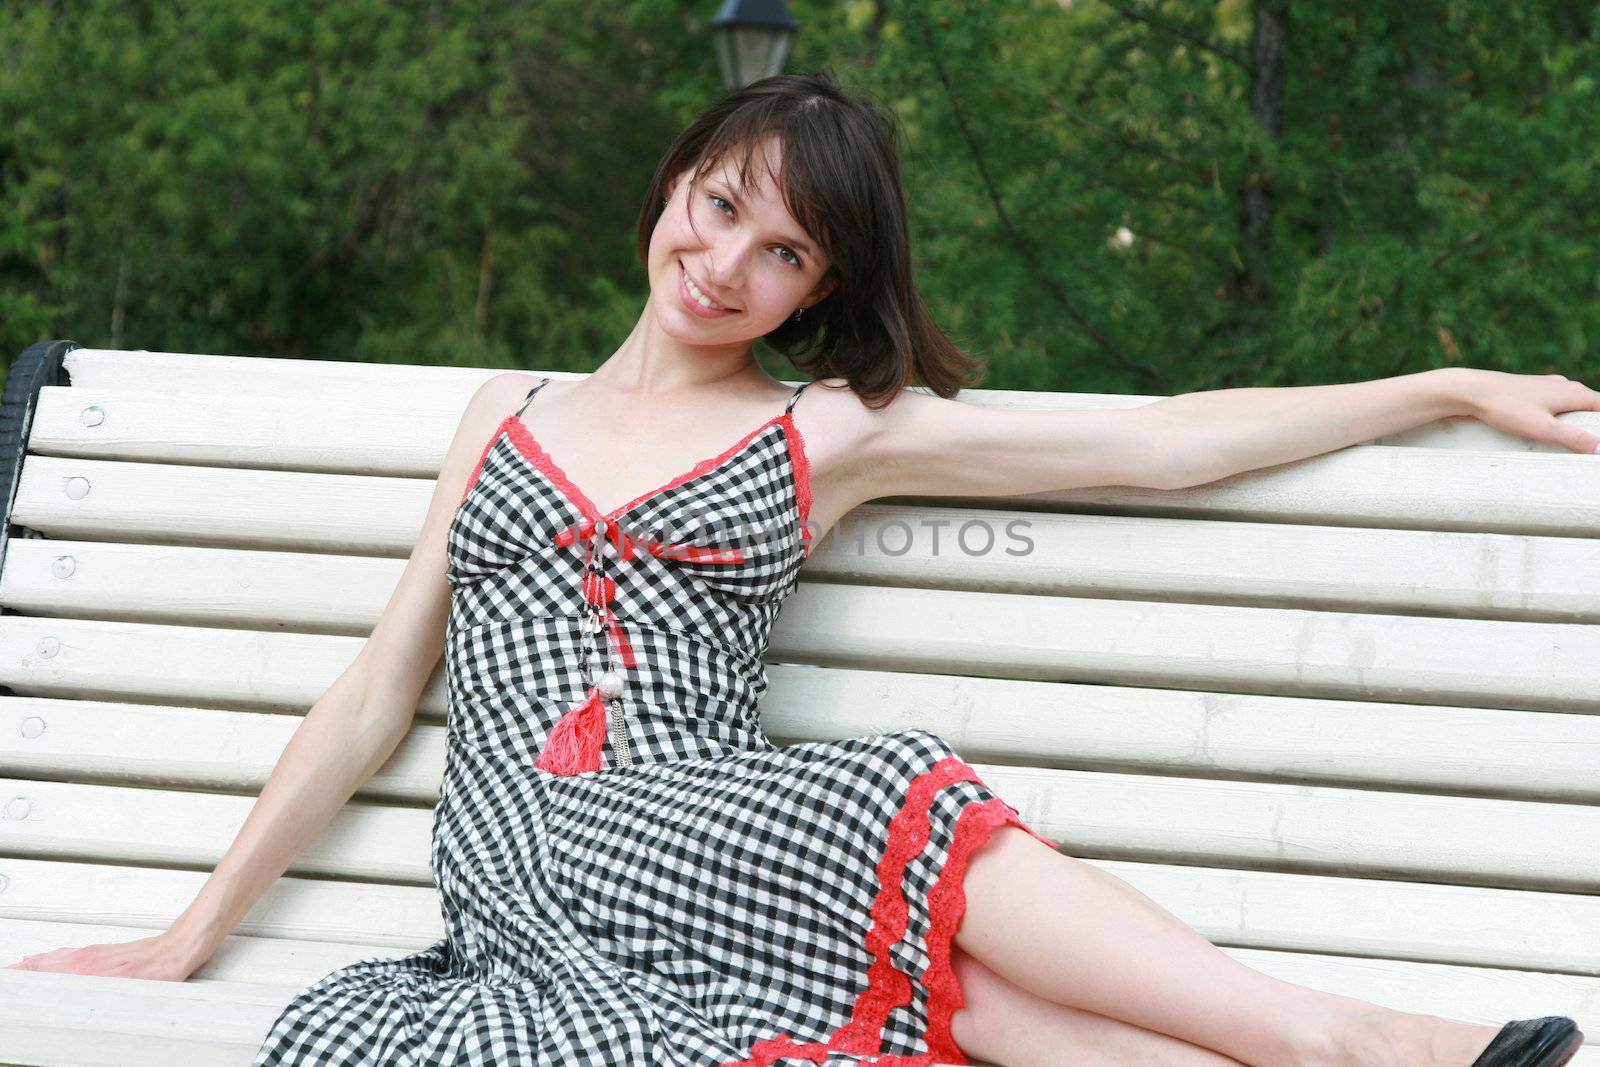 The beautiful girl poses on a bench